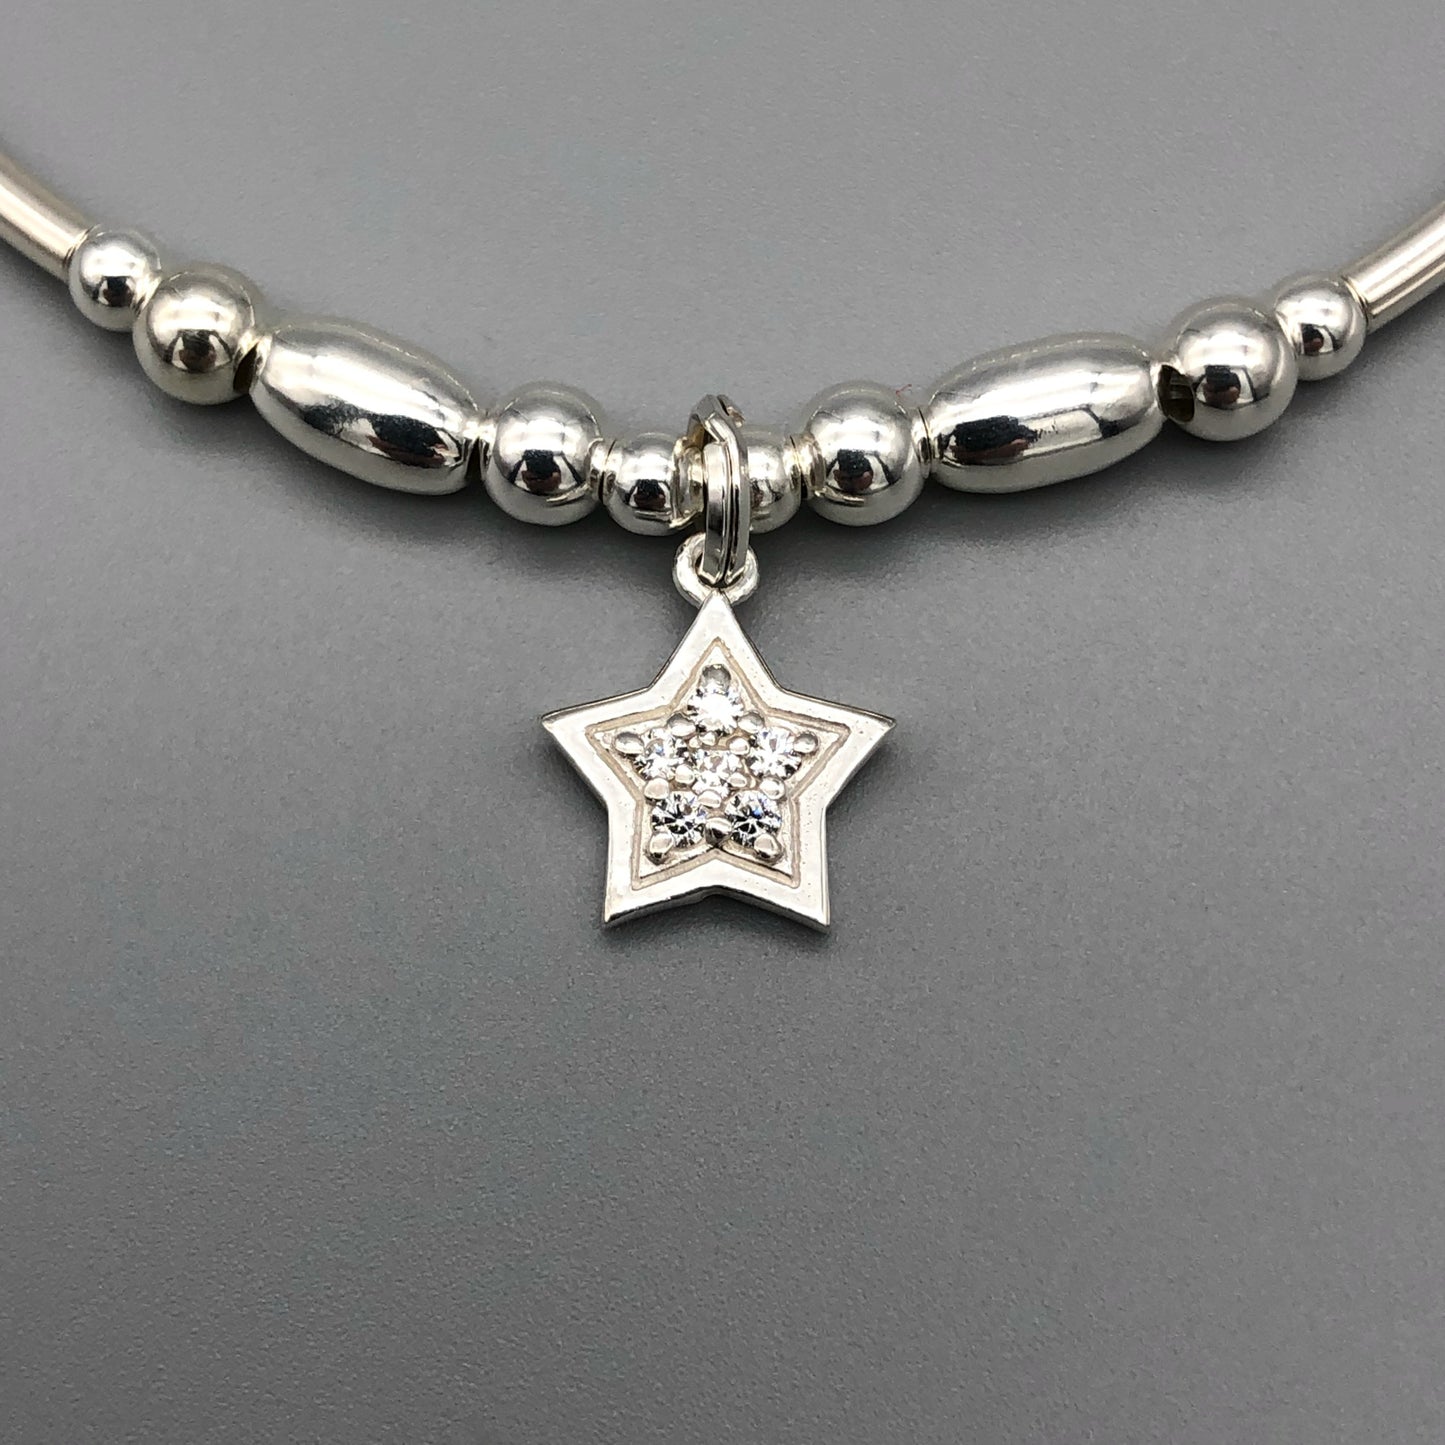 Closeup of Star charm sterling silver stacking charm bracelet by My Silver Wish